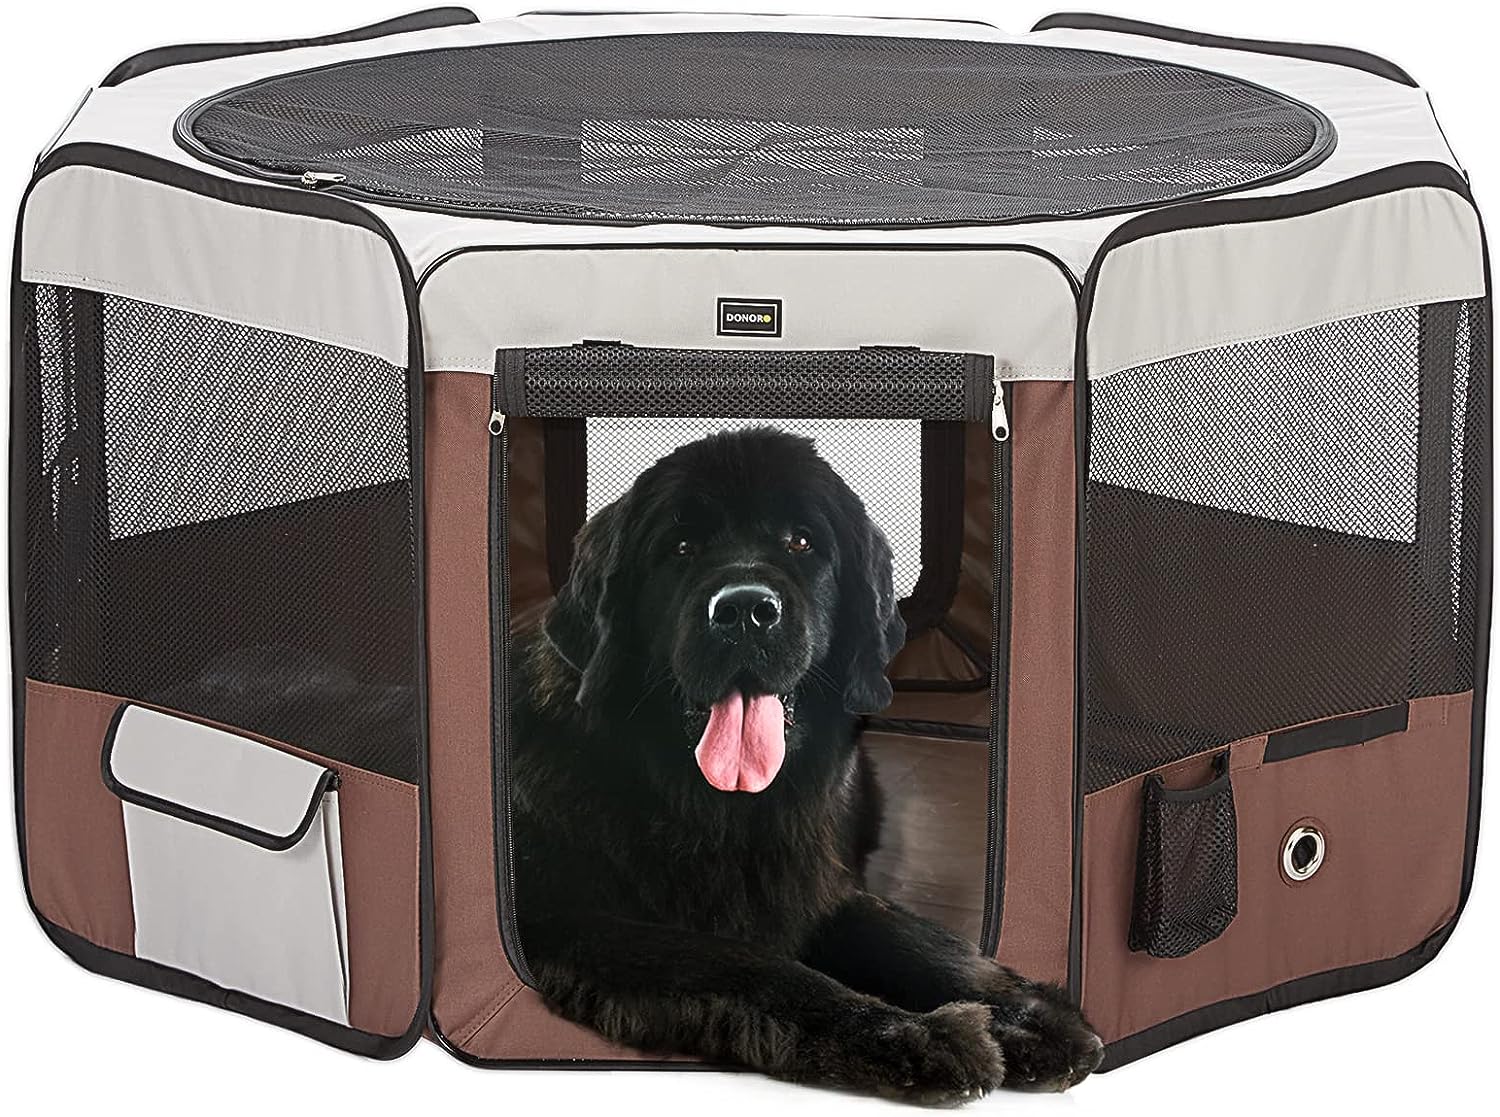 You are currently viewing Small Medium Dogs Playpen Review